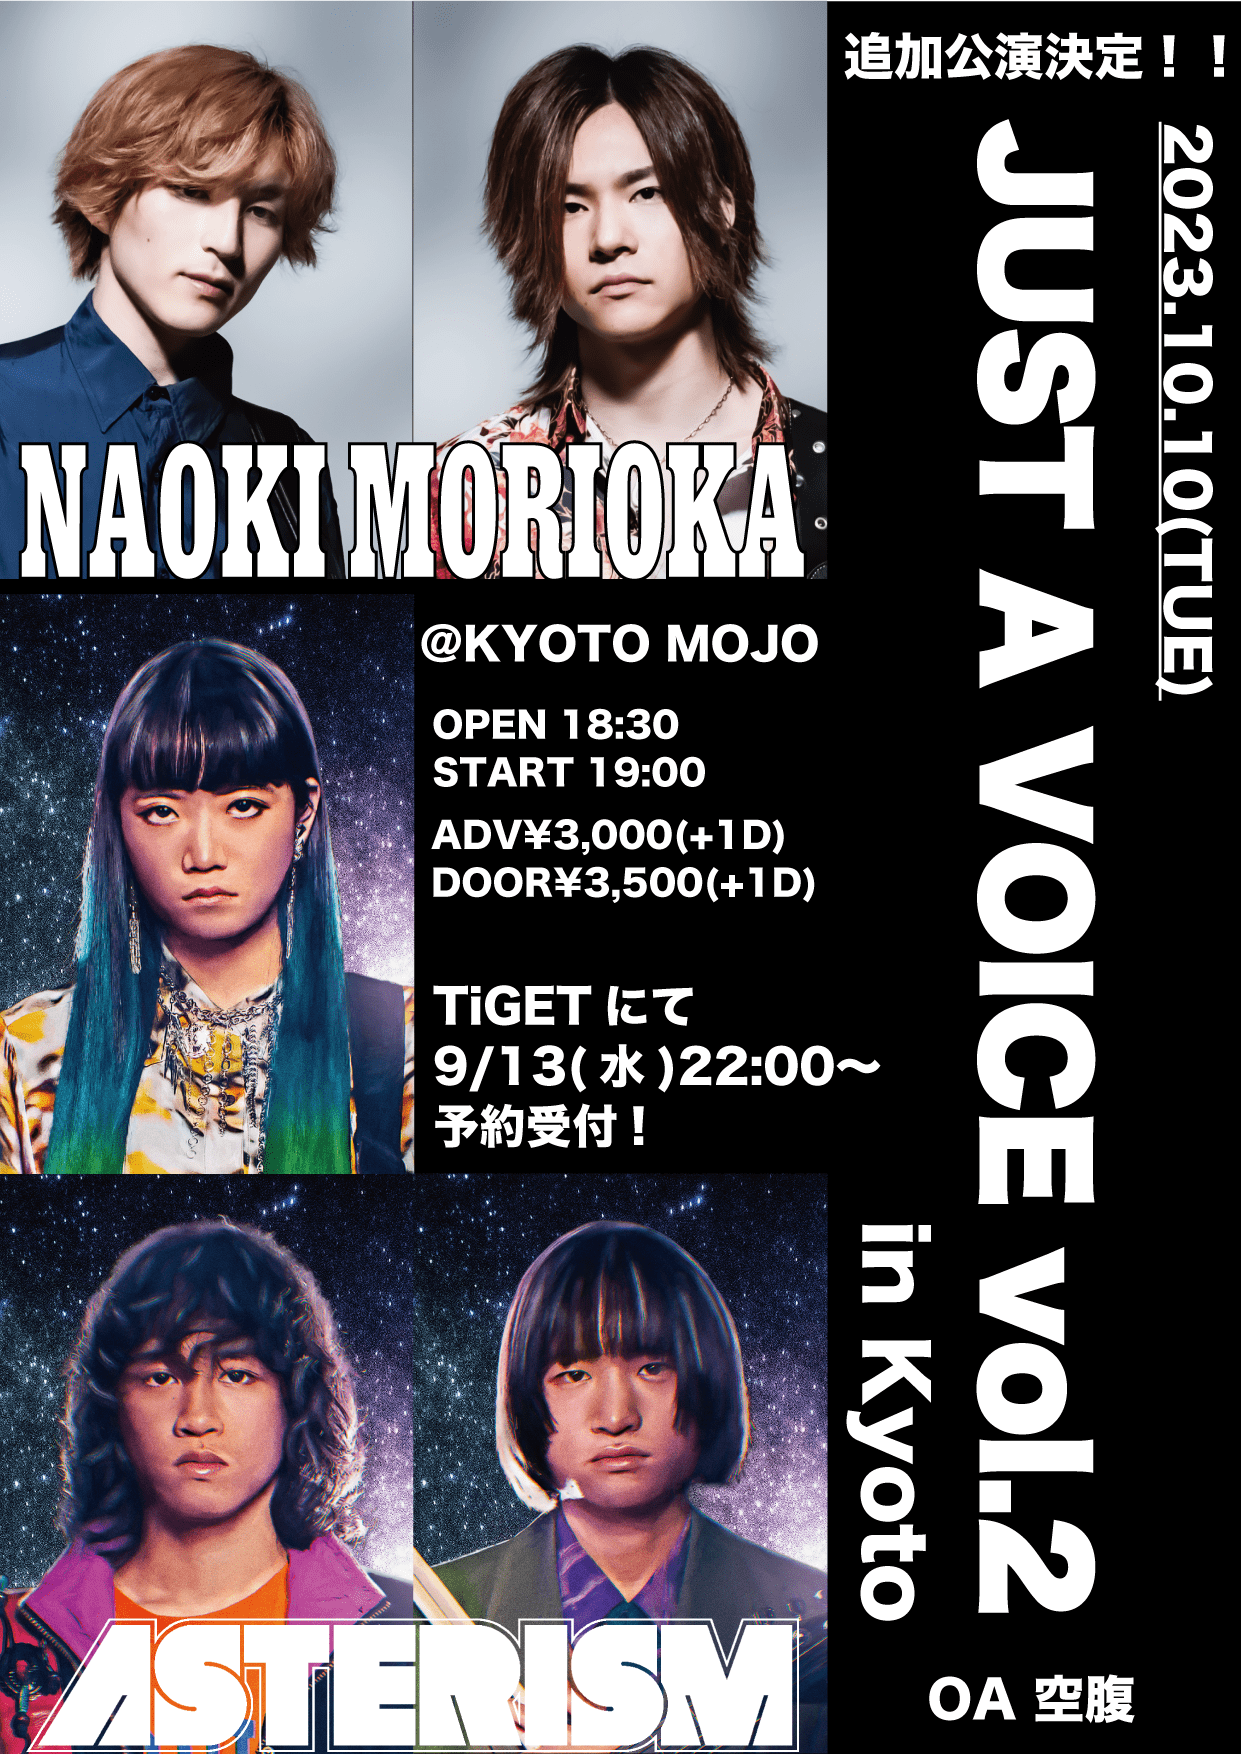 JUST A VOICE vol.2 in Kyoto